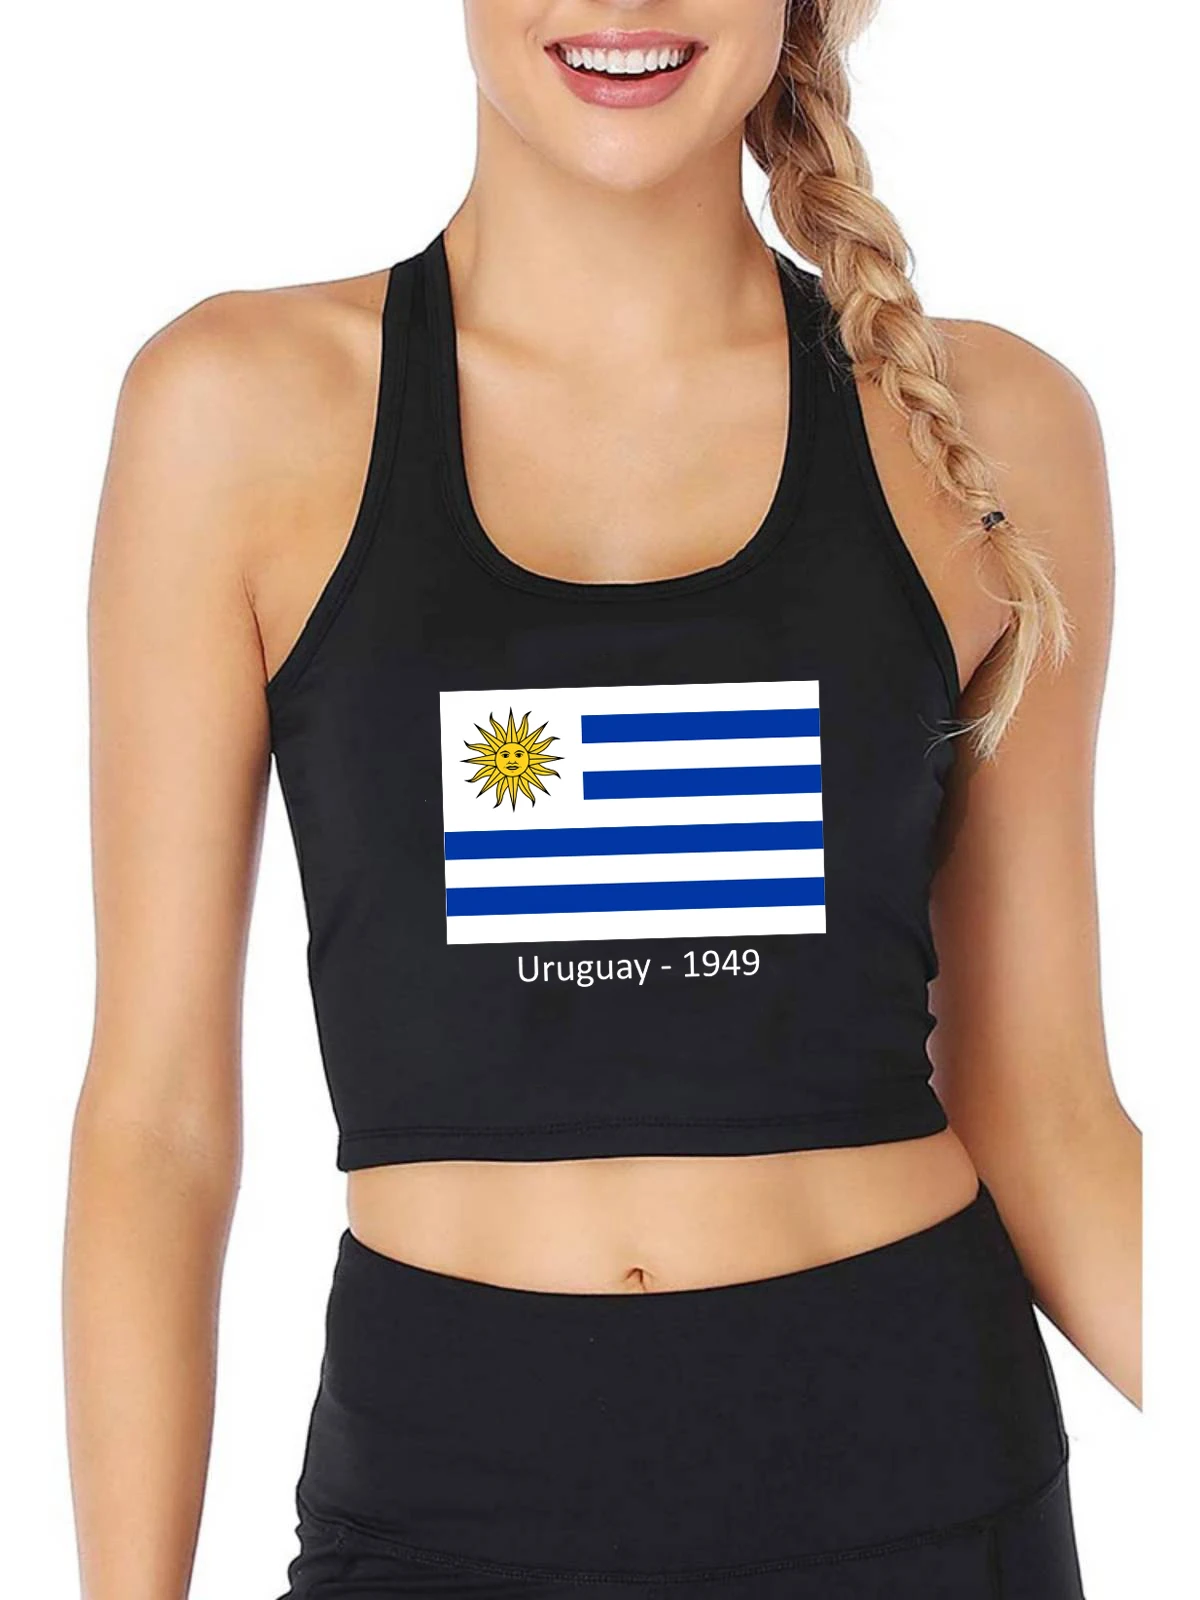 

Flag Of Uruguay Graphics Sexy Slim Fit Crop Top Girl's Retro Patriotic Memorial Style Tank Tops Cotton Sports Training Camisole